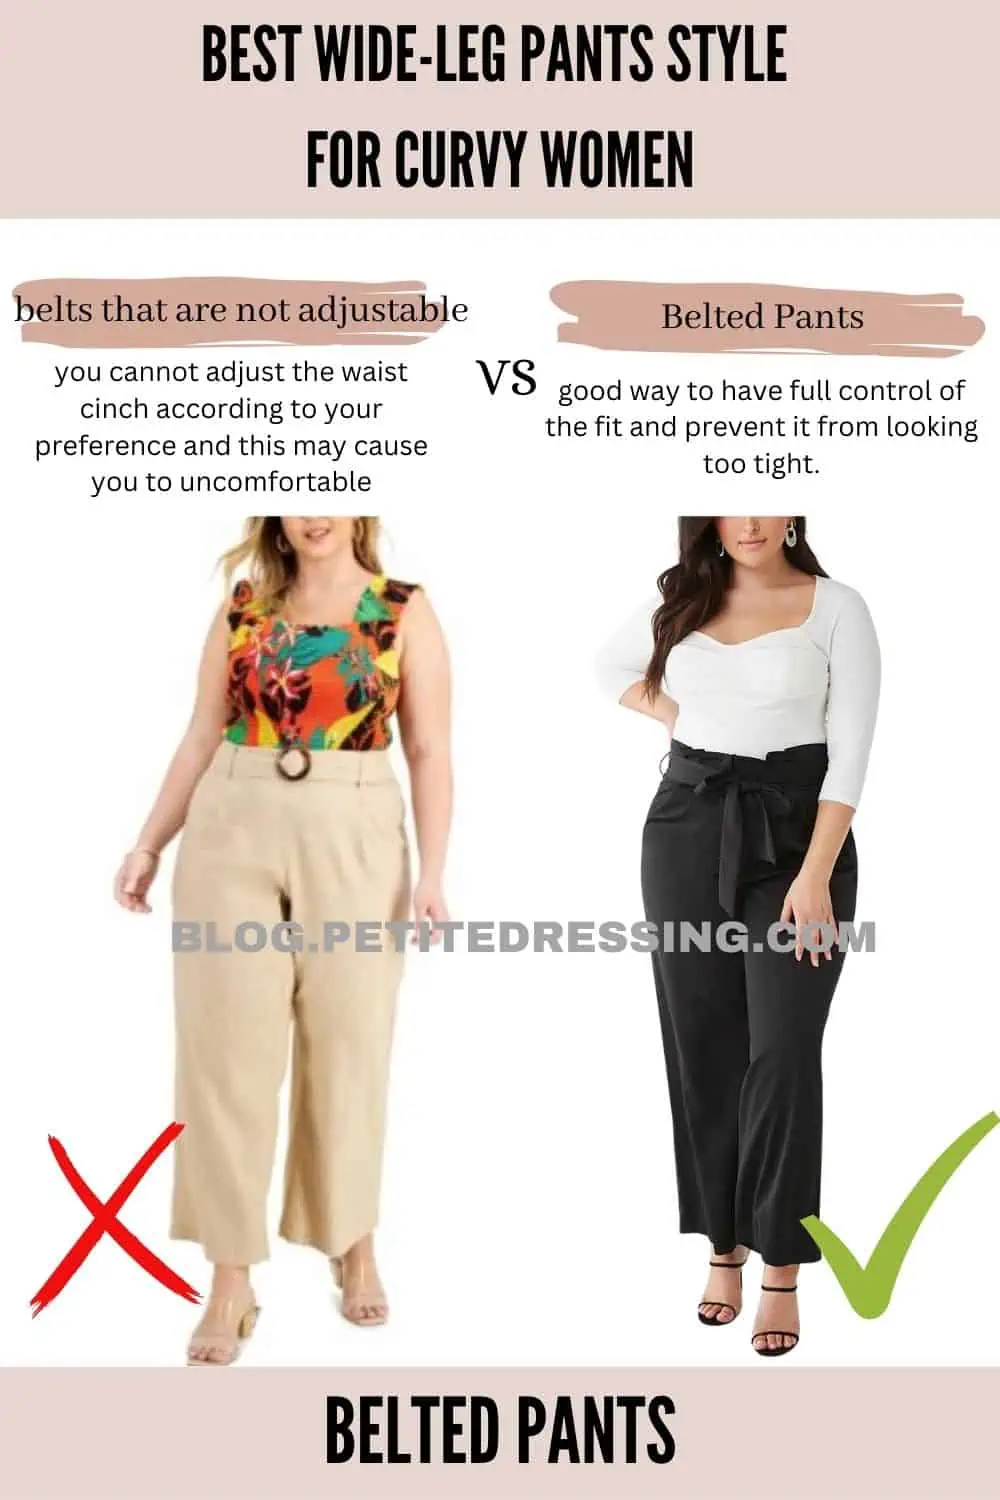 Wide-Leg Pants Style Guide for Curvy Women - Petite Dressing